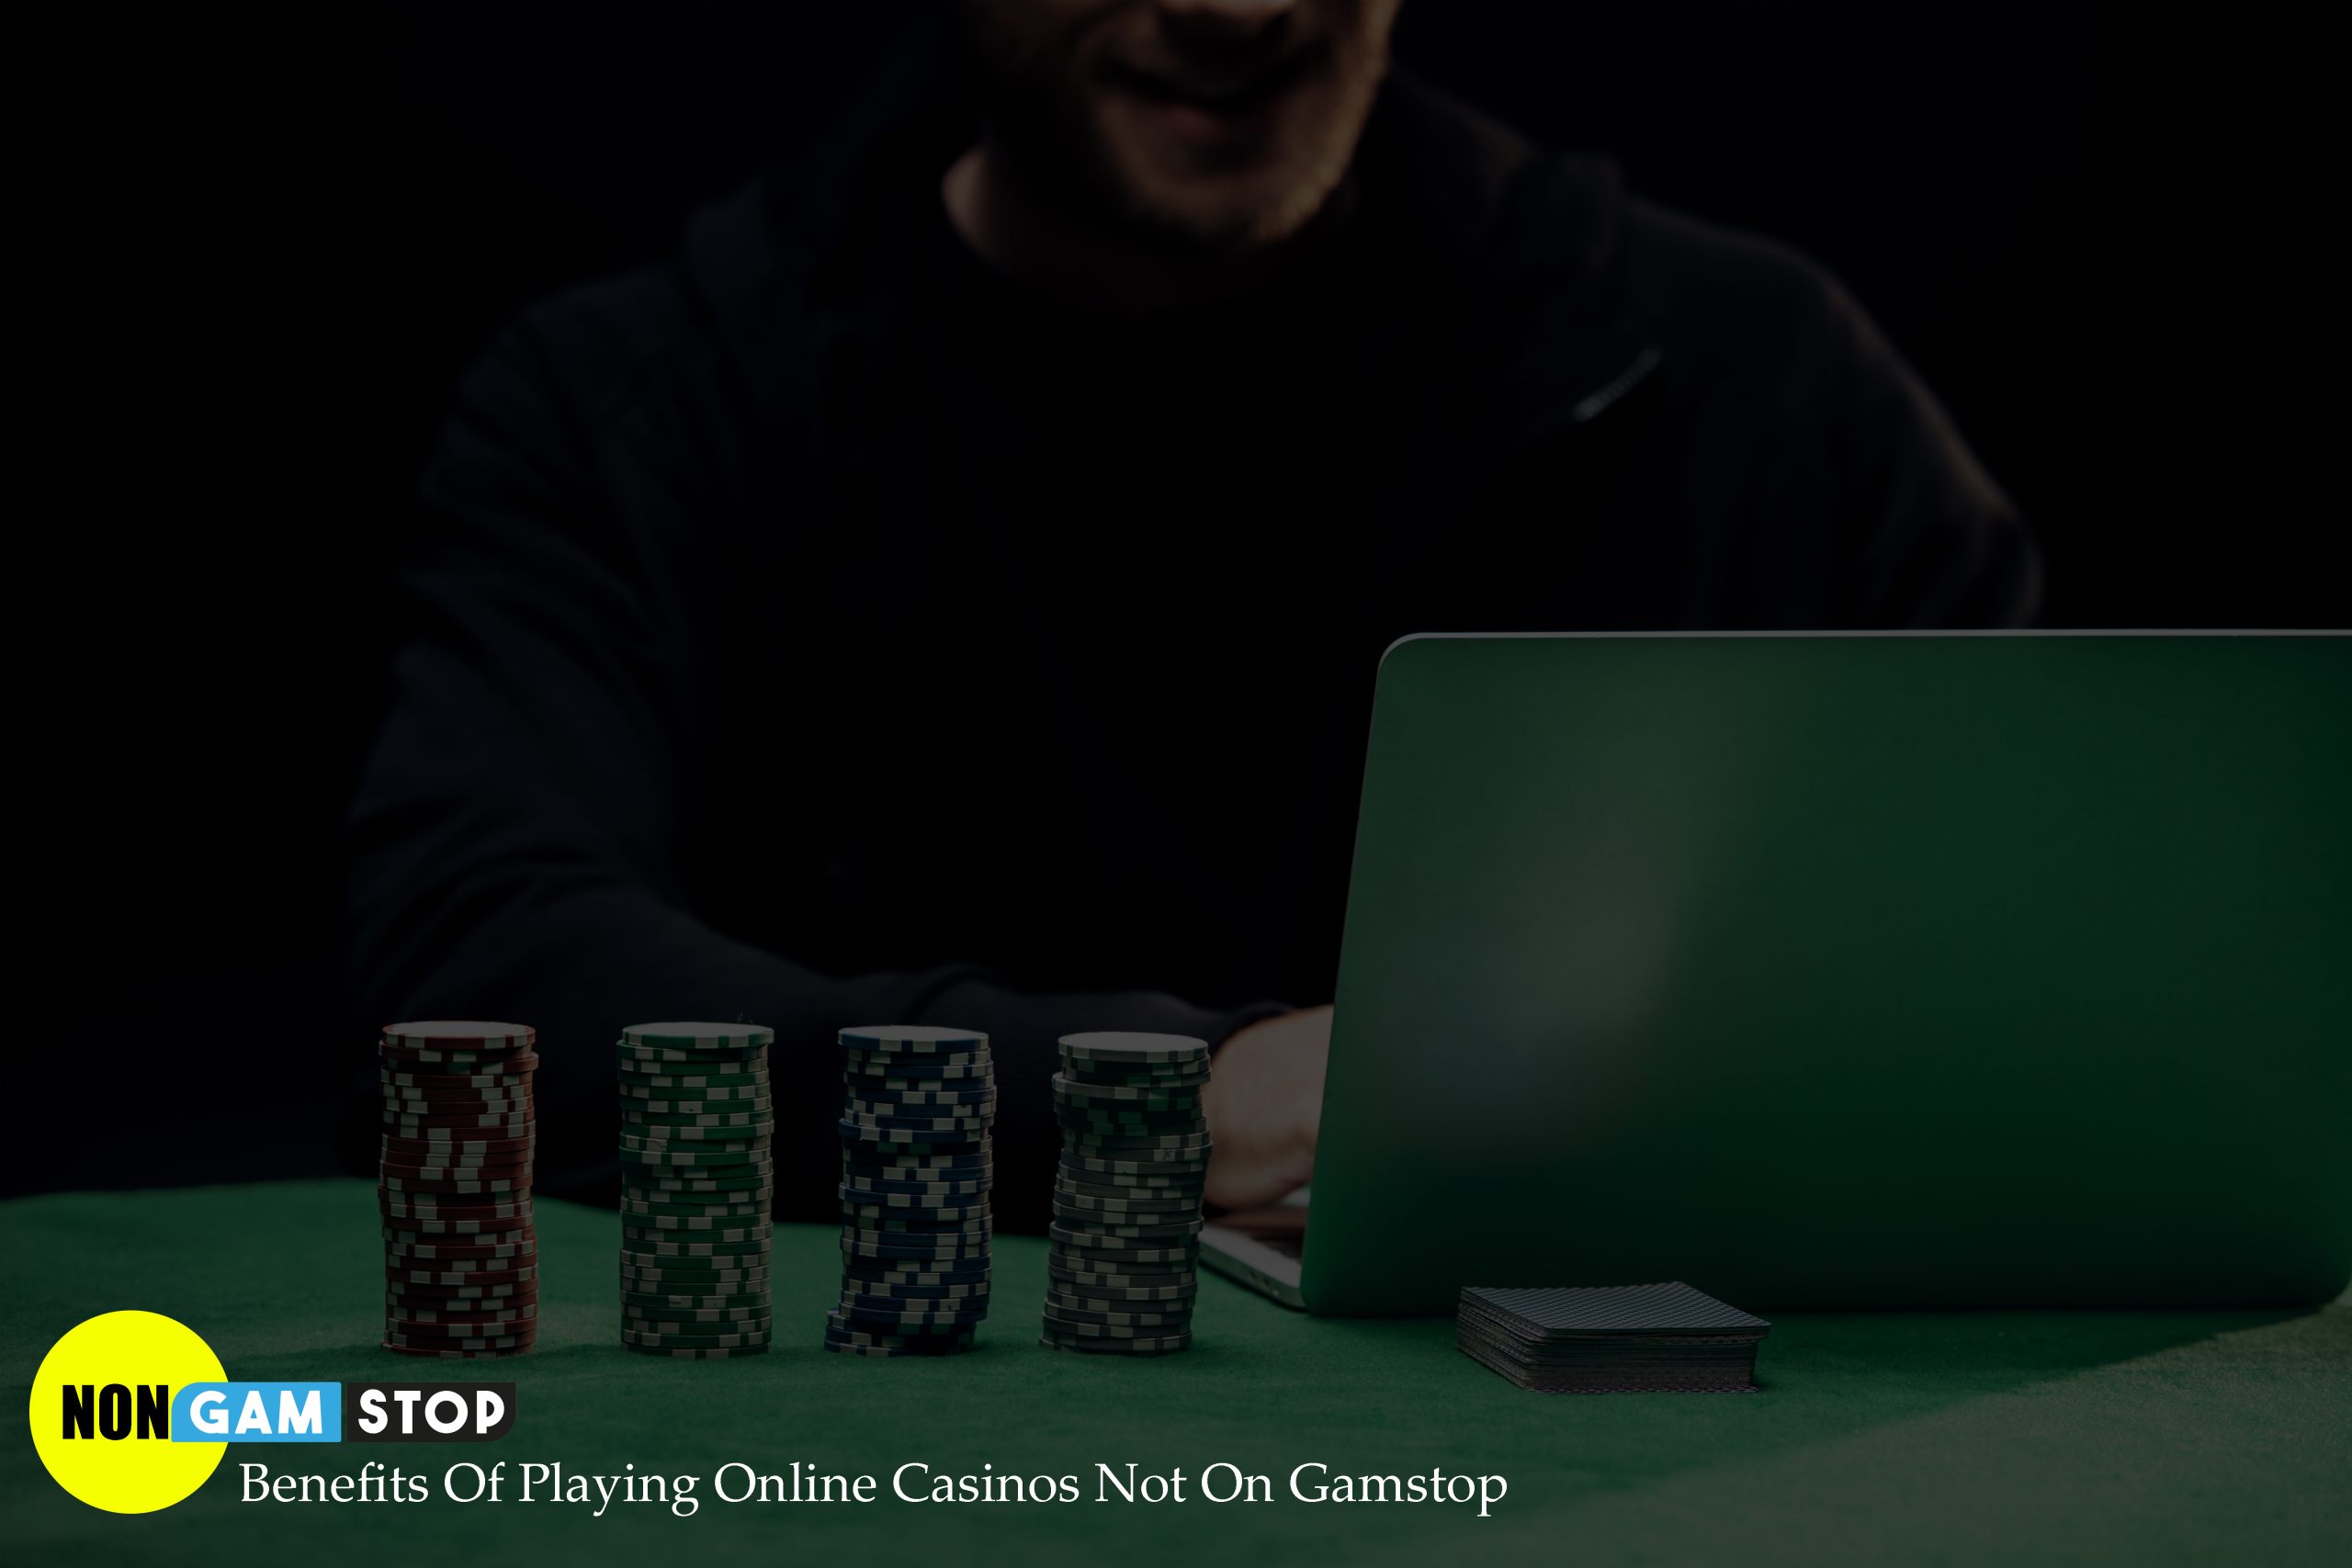 Benefits Of Playing Online Casinos Not On Gamstop